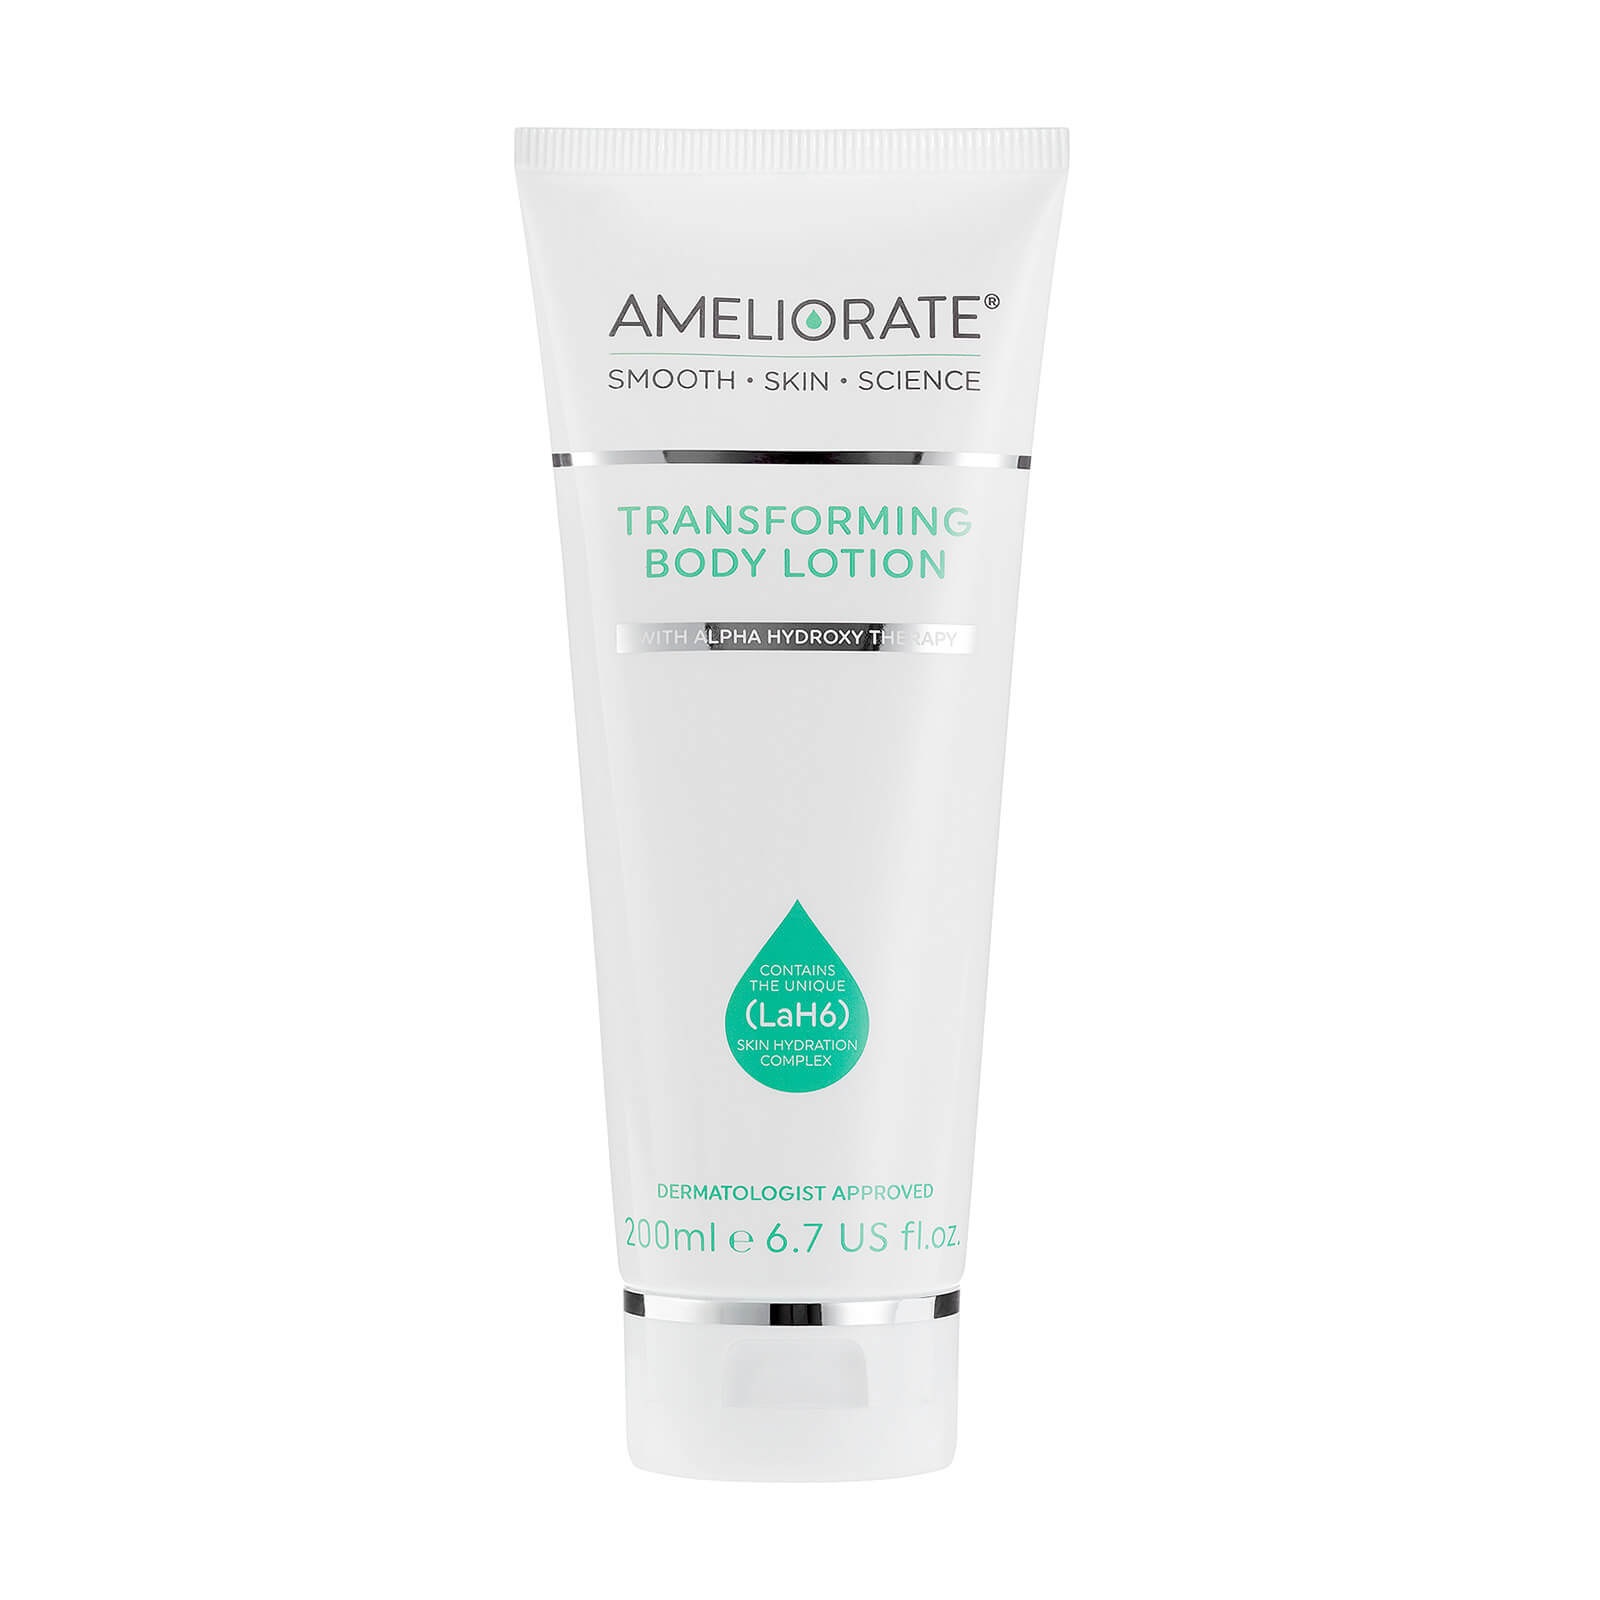 Ameliorate: Save Up to 20% when you buy two products